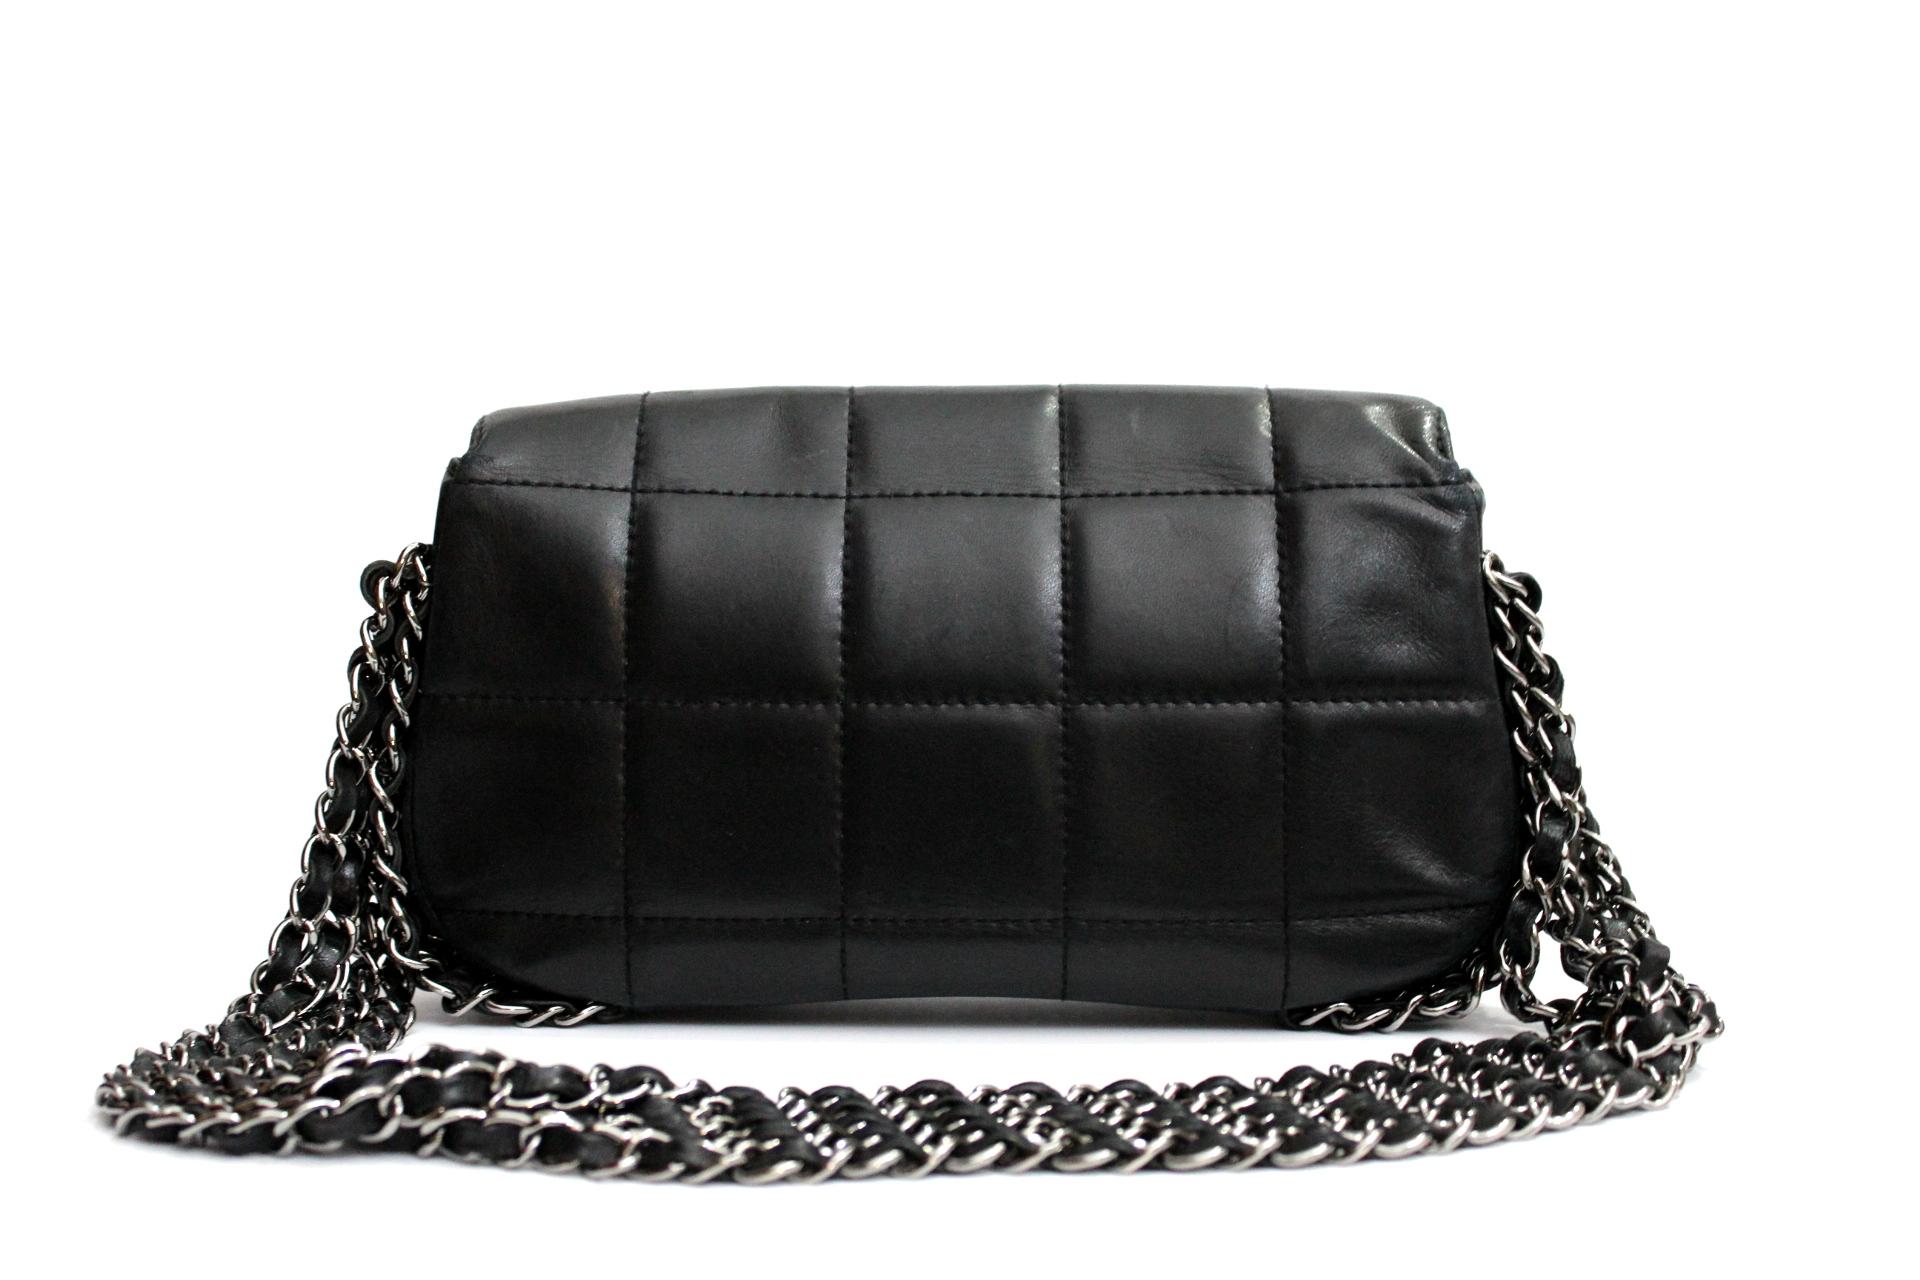 Black leather and cotton multiple chain logo shoulder bag from Chanel Vintage featuring a flip-lock closure, a quilted effect, a silver tone logo, a chain strap and internal pockets
Very soft black lambskin. Wearable on the shoulder.
The bag is in